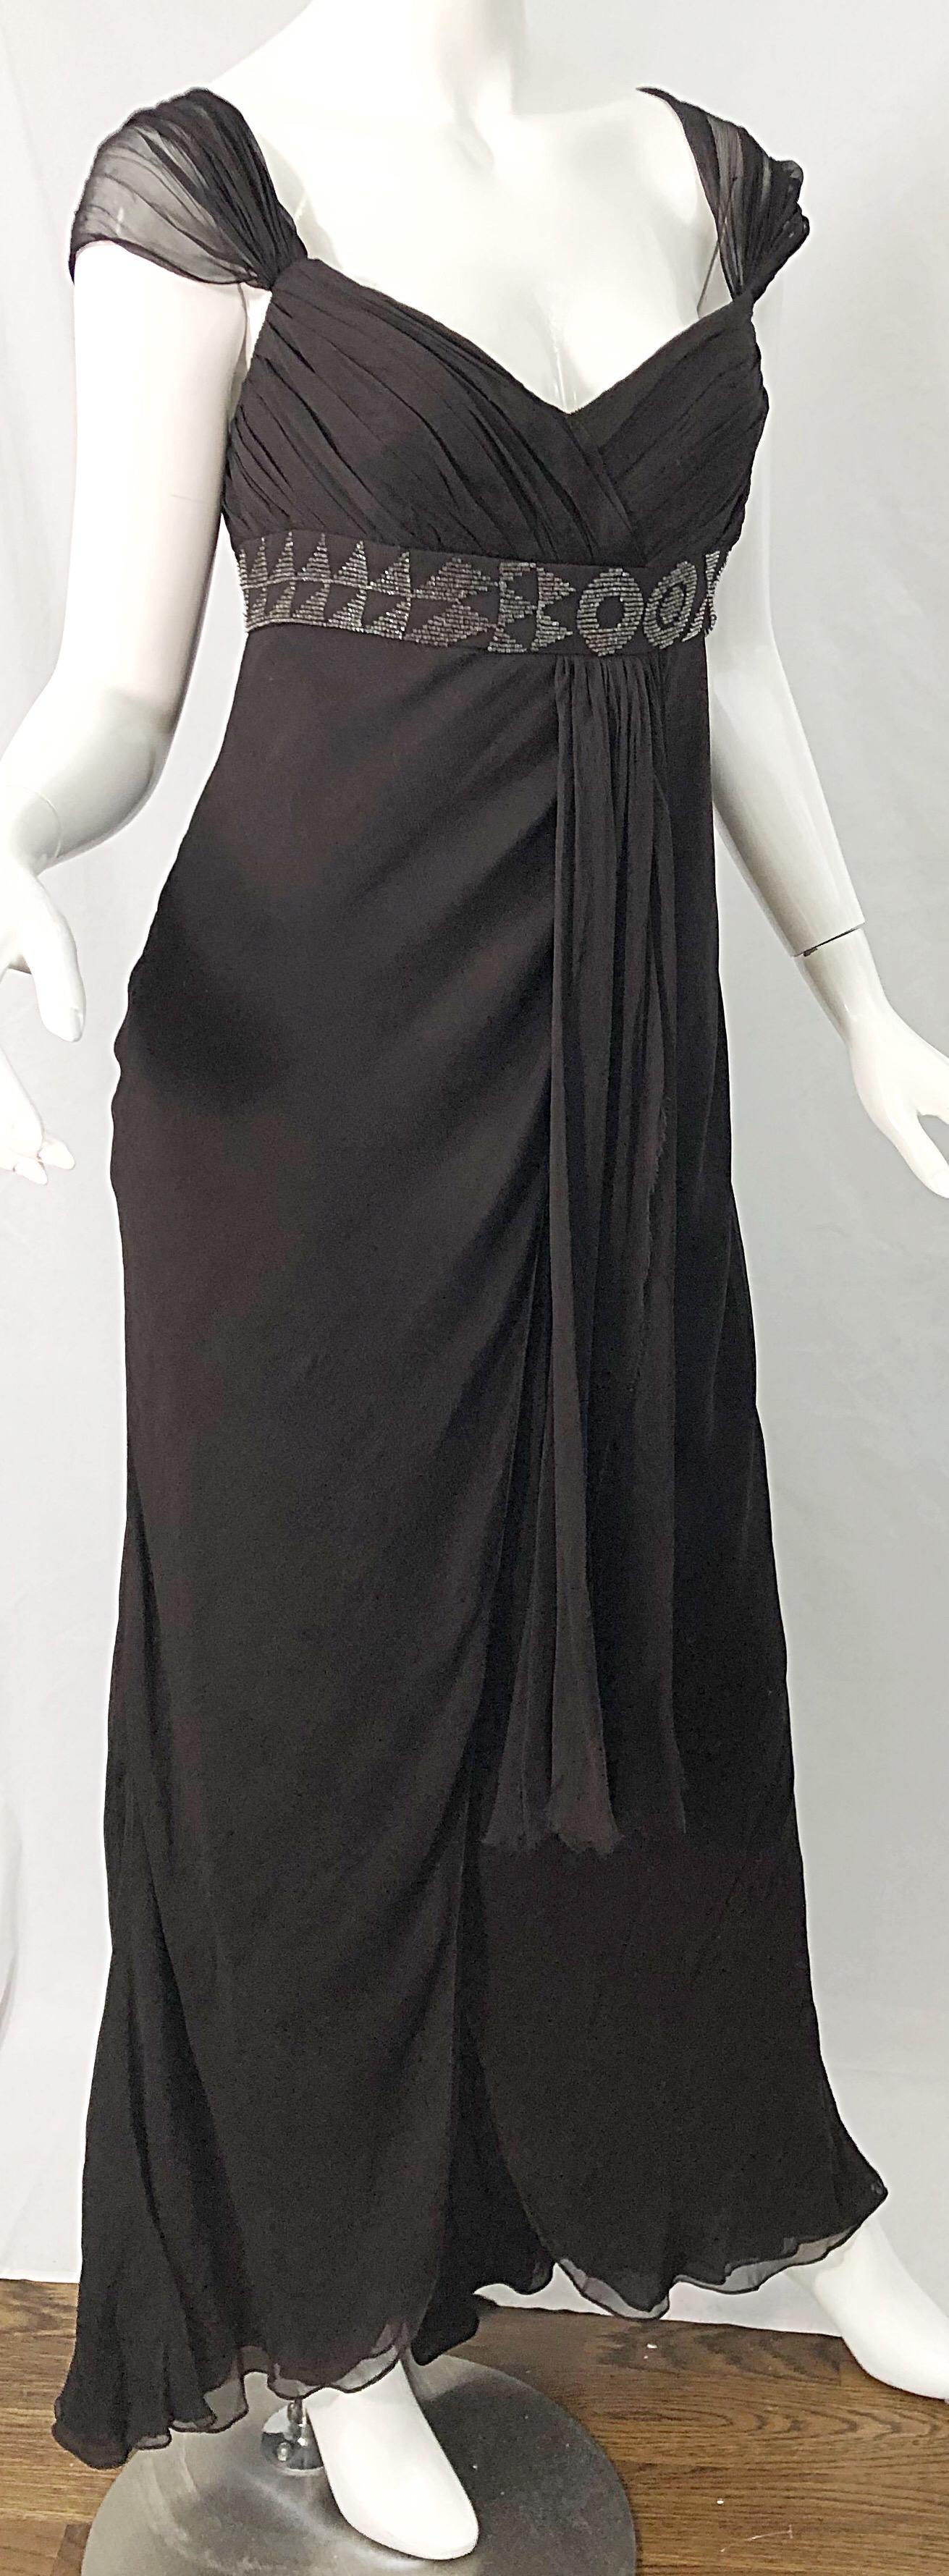 Women's J Mendel Size 8 Early 2000s Brown Silk Chiffon Beaded Grecian Style Evening Gown For Sale